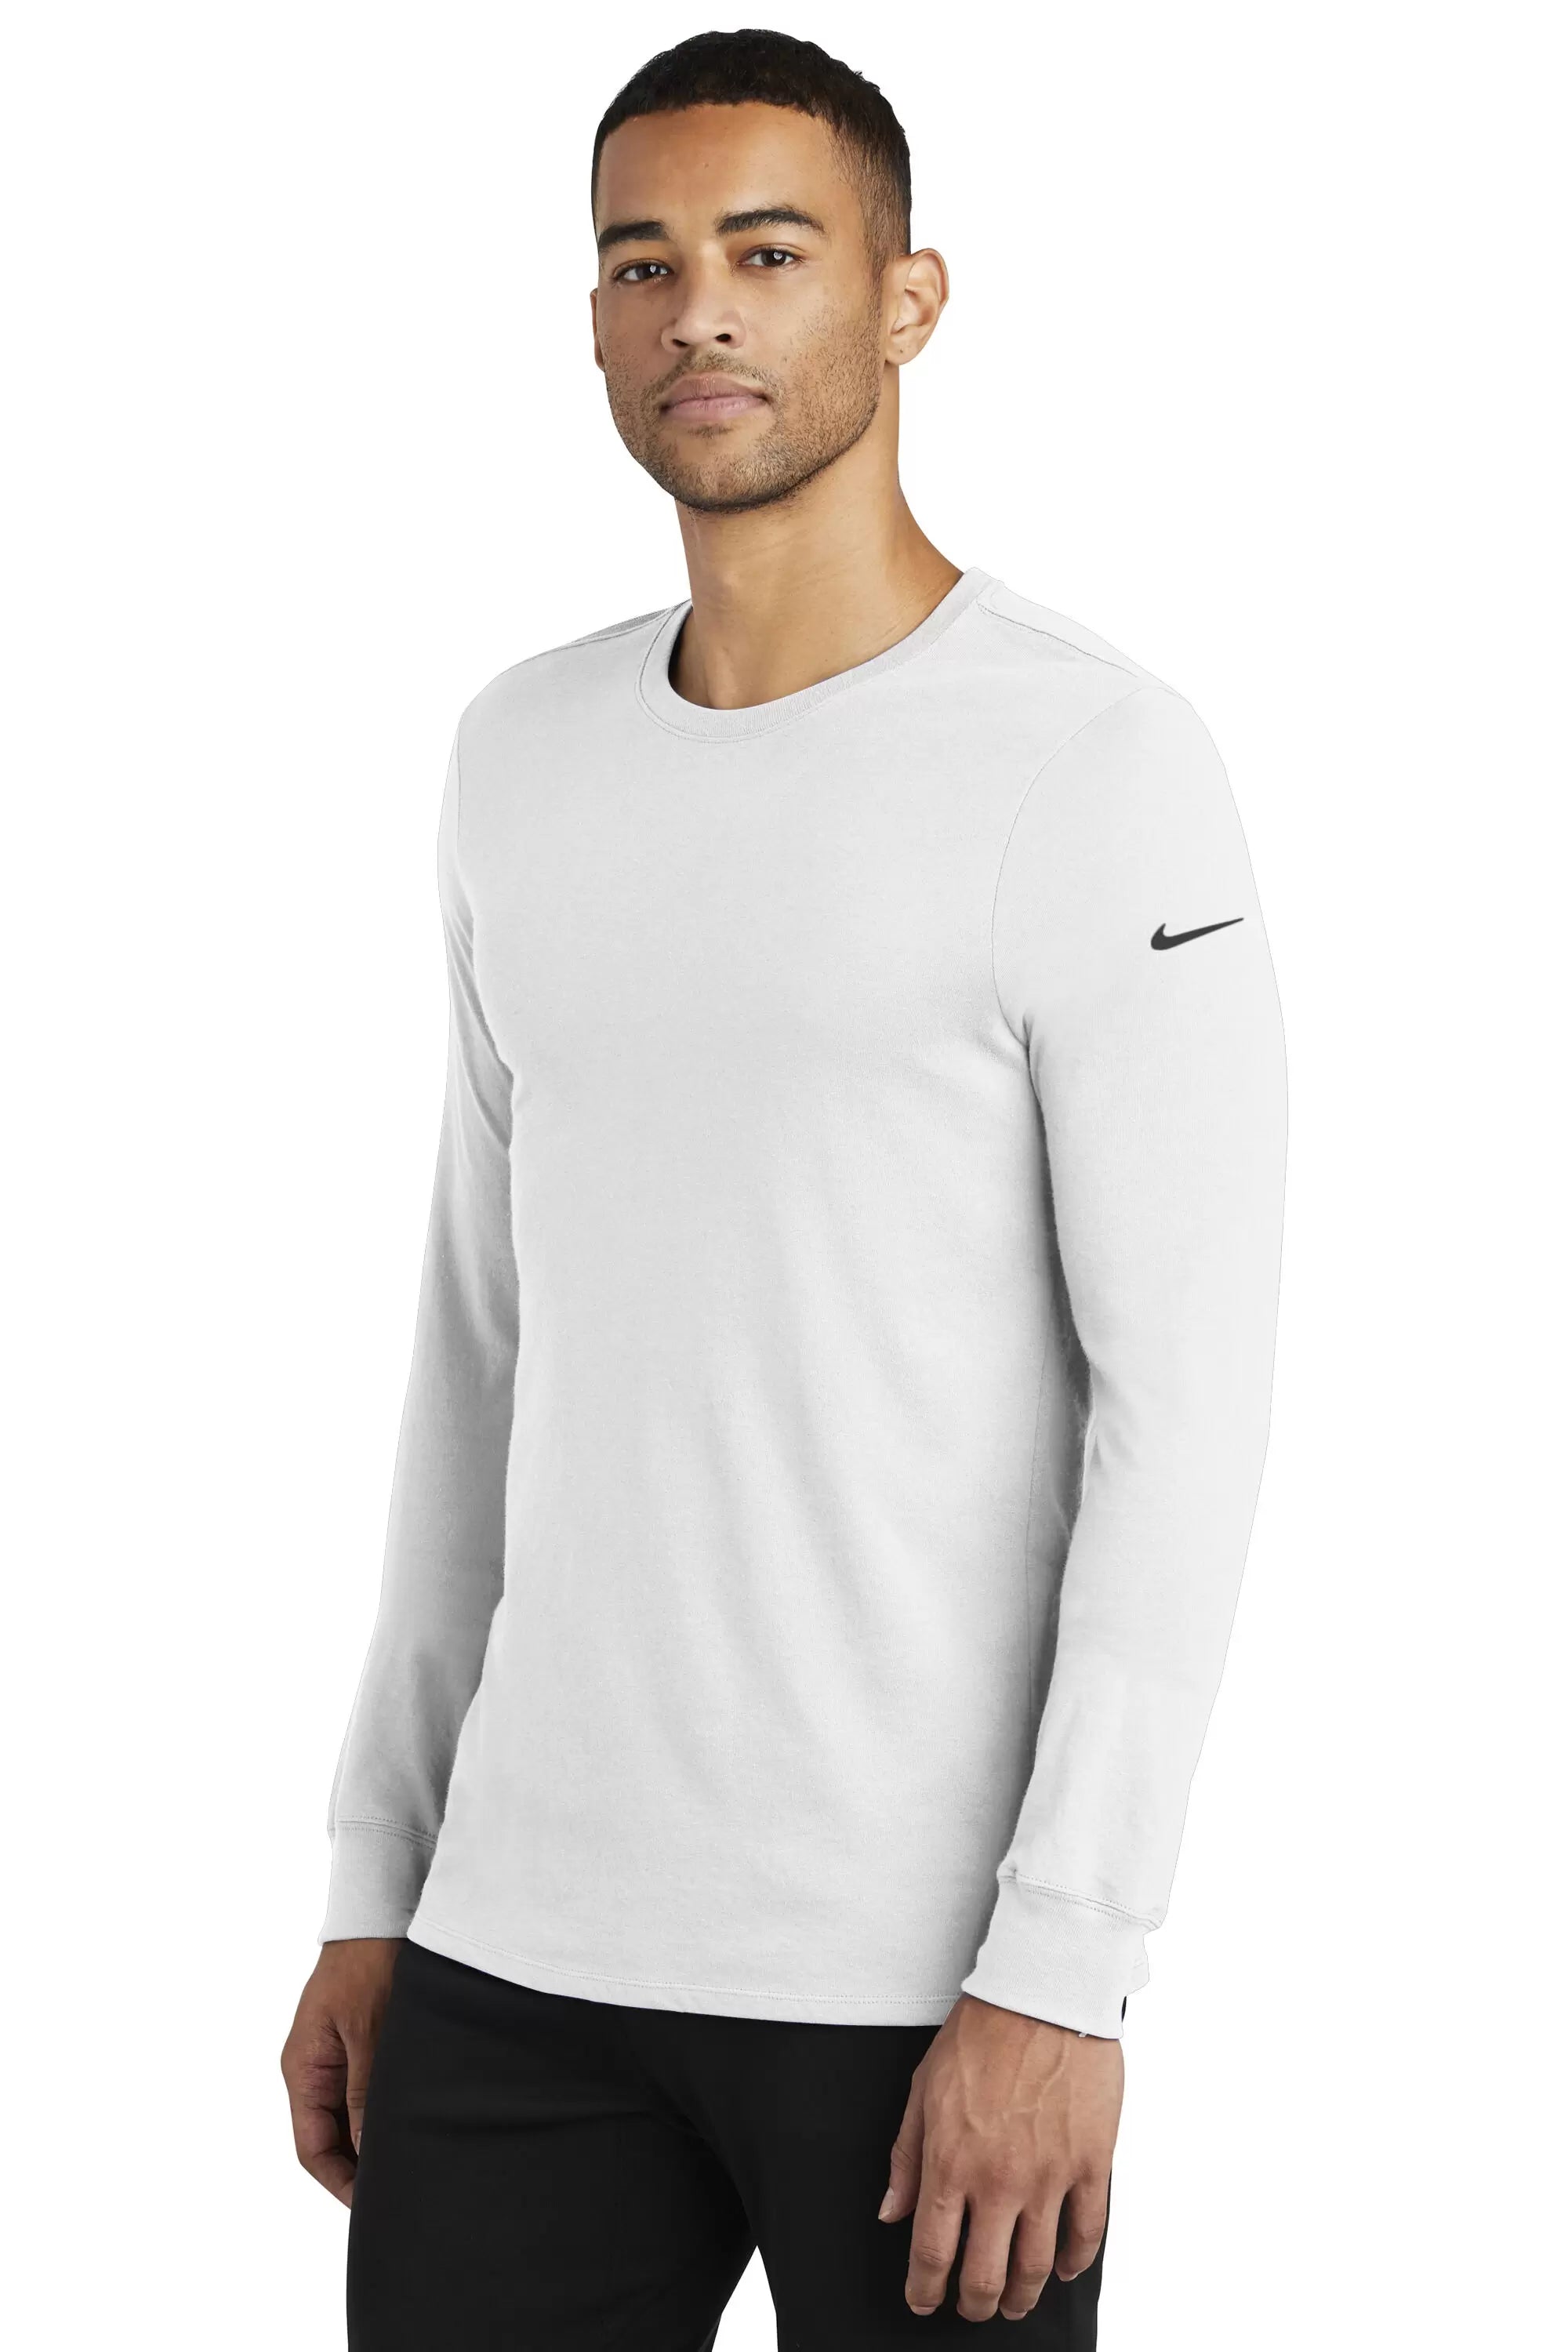 Nike Dri-FIT Cotton/Poly Long Sleeve Tee - Sparta Pewter USA